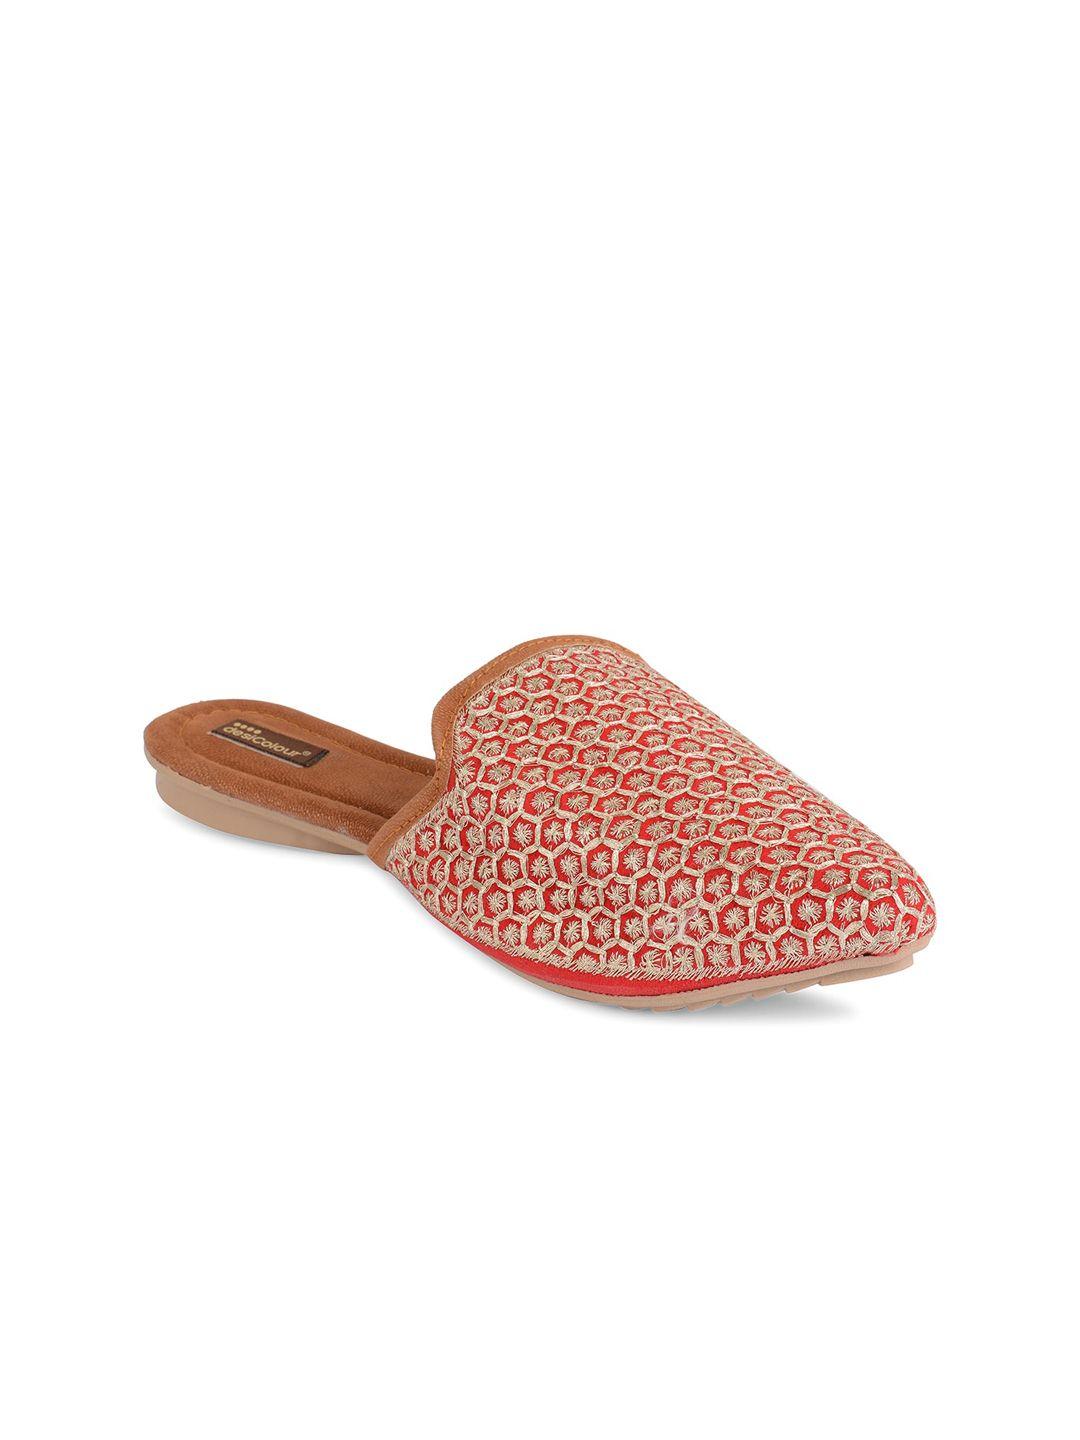 desi colour women embroidered ethnic mules flats